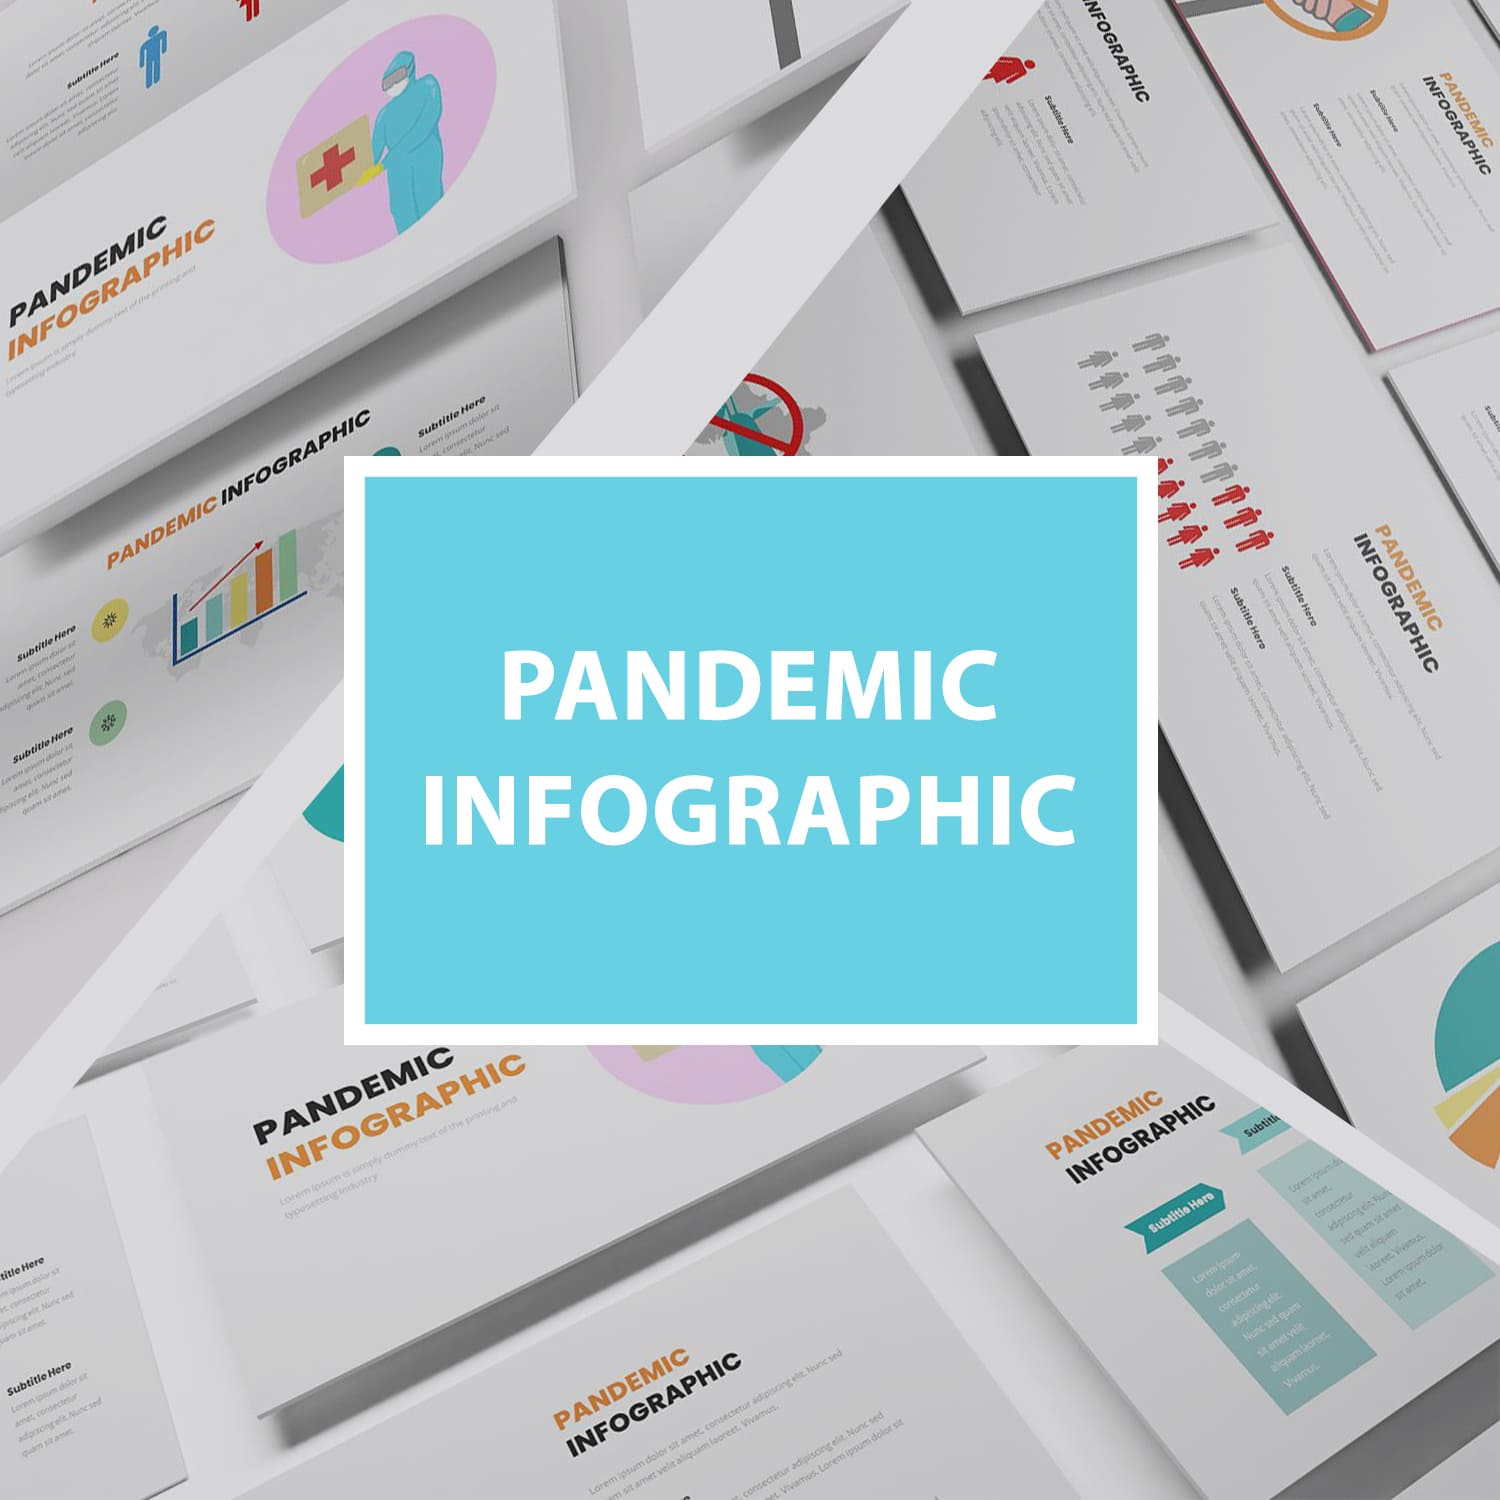 Pandemic Infographic Powerpoint main cover.